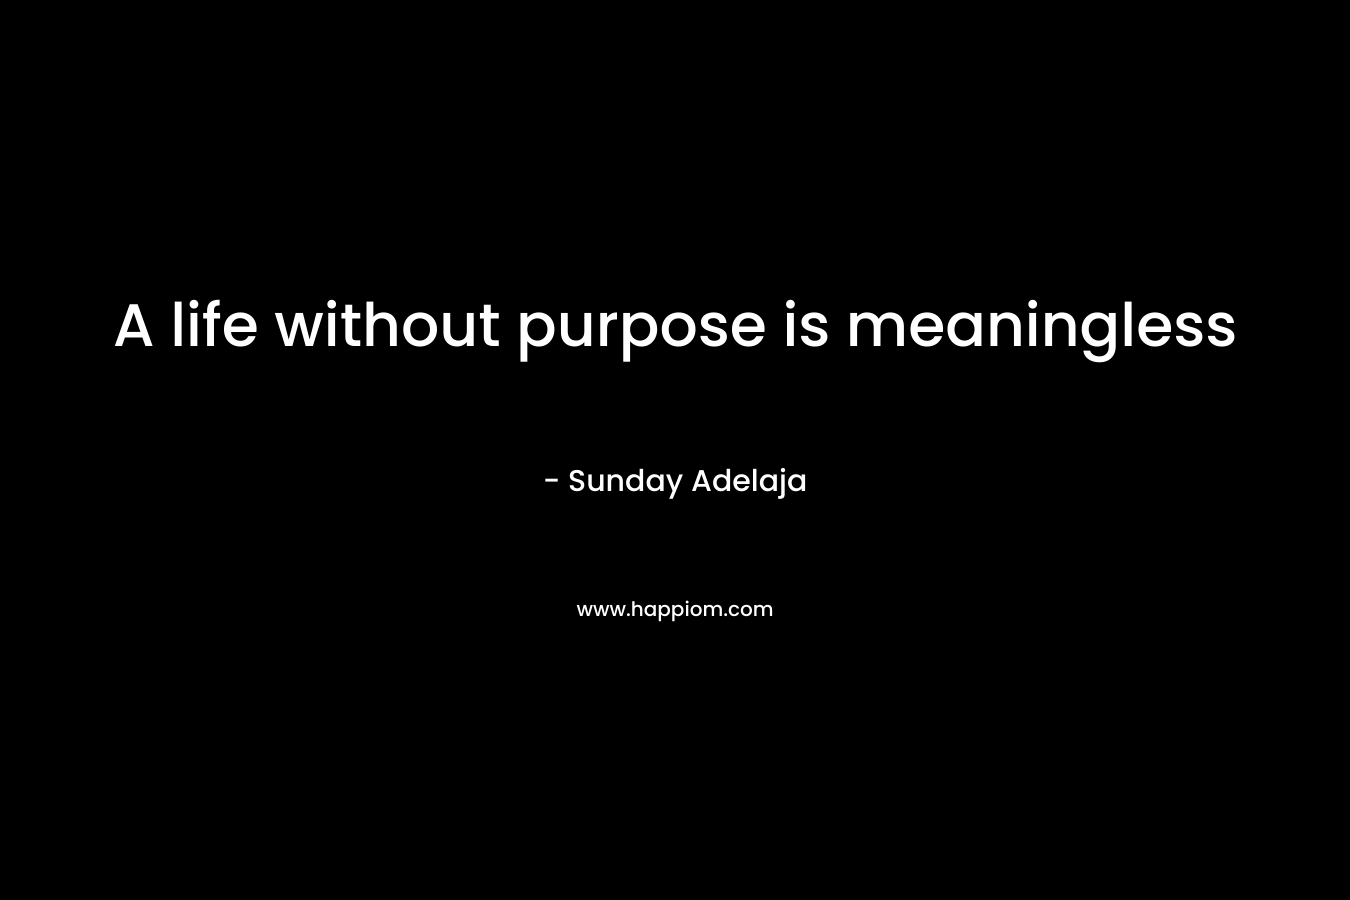 A life without purpose is meaningless